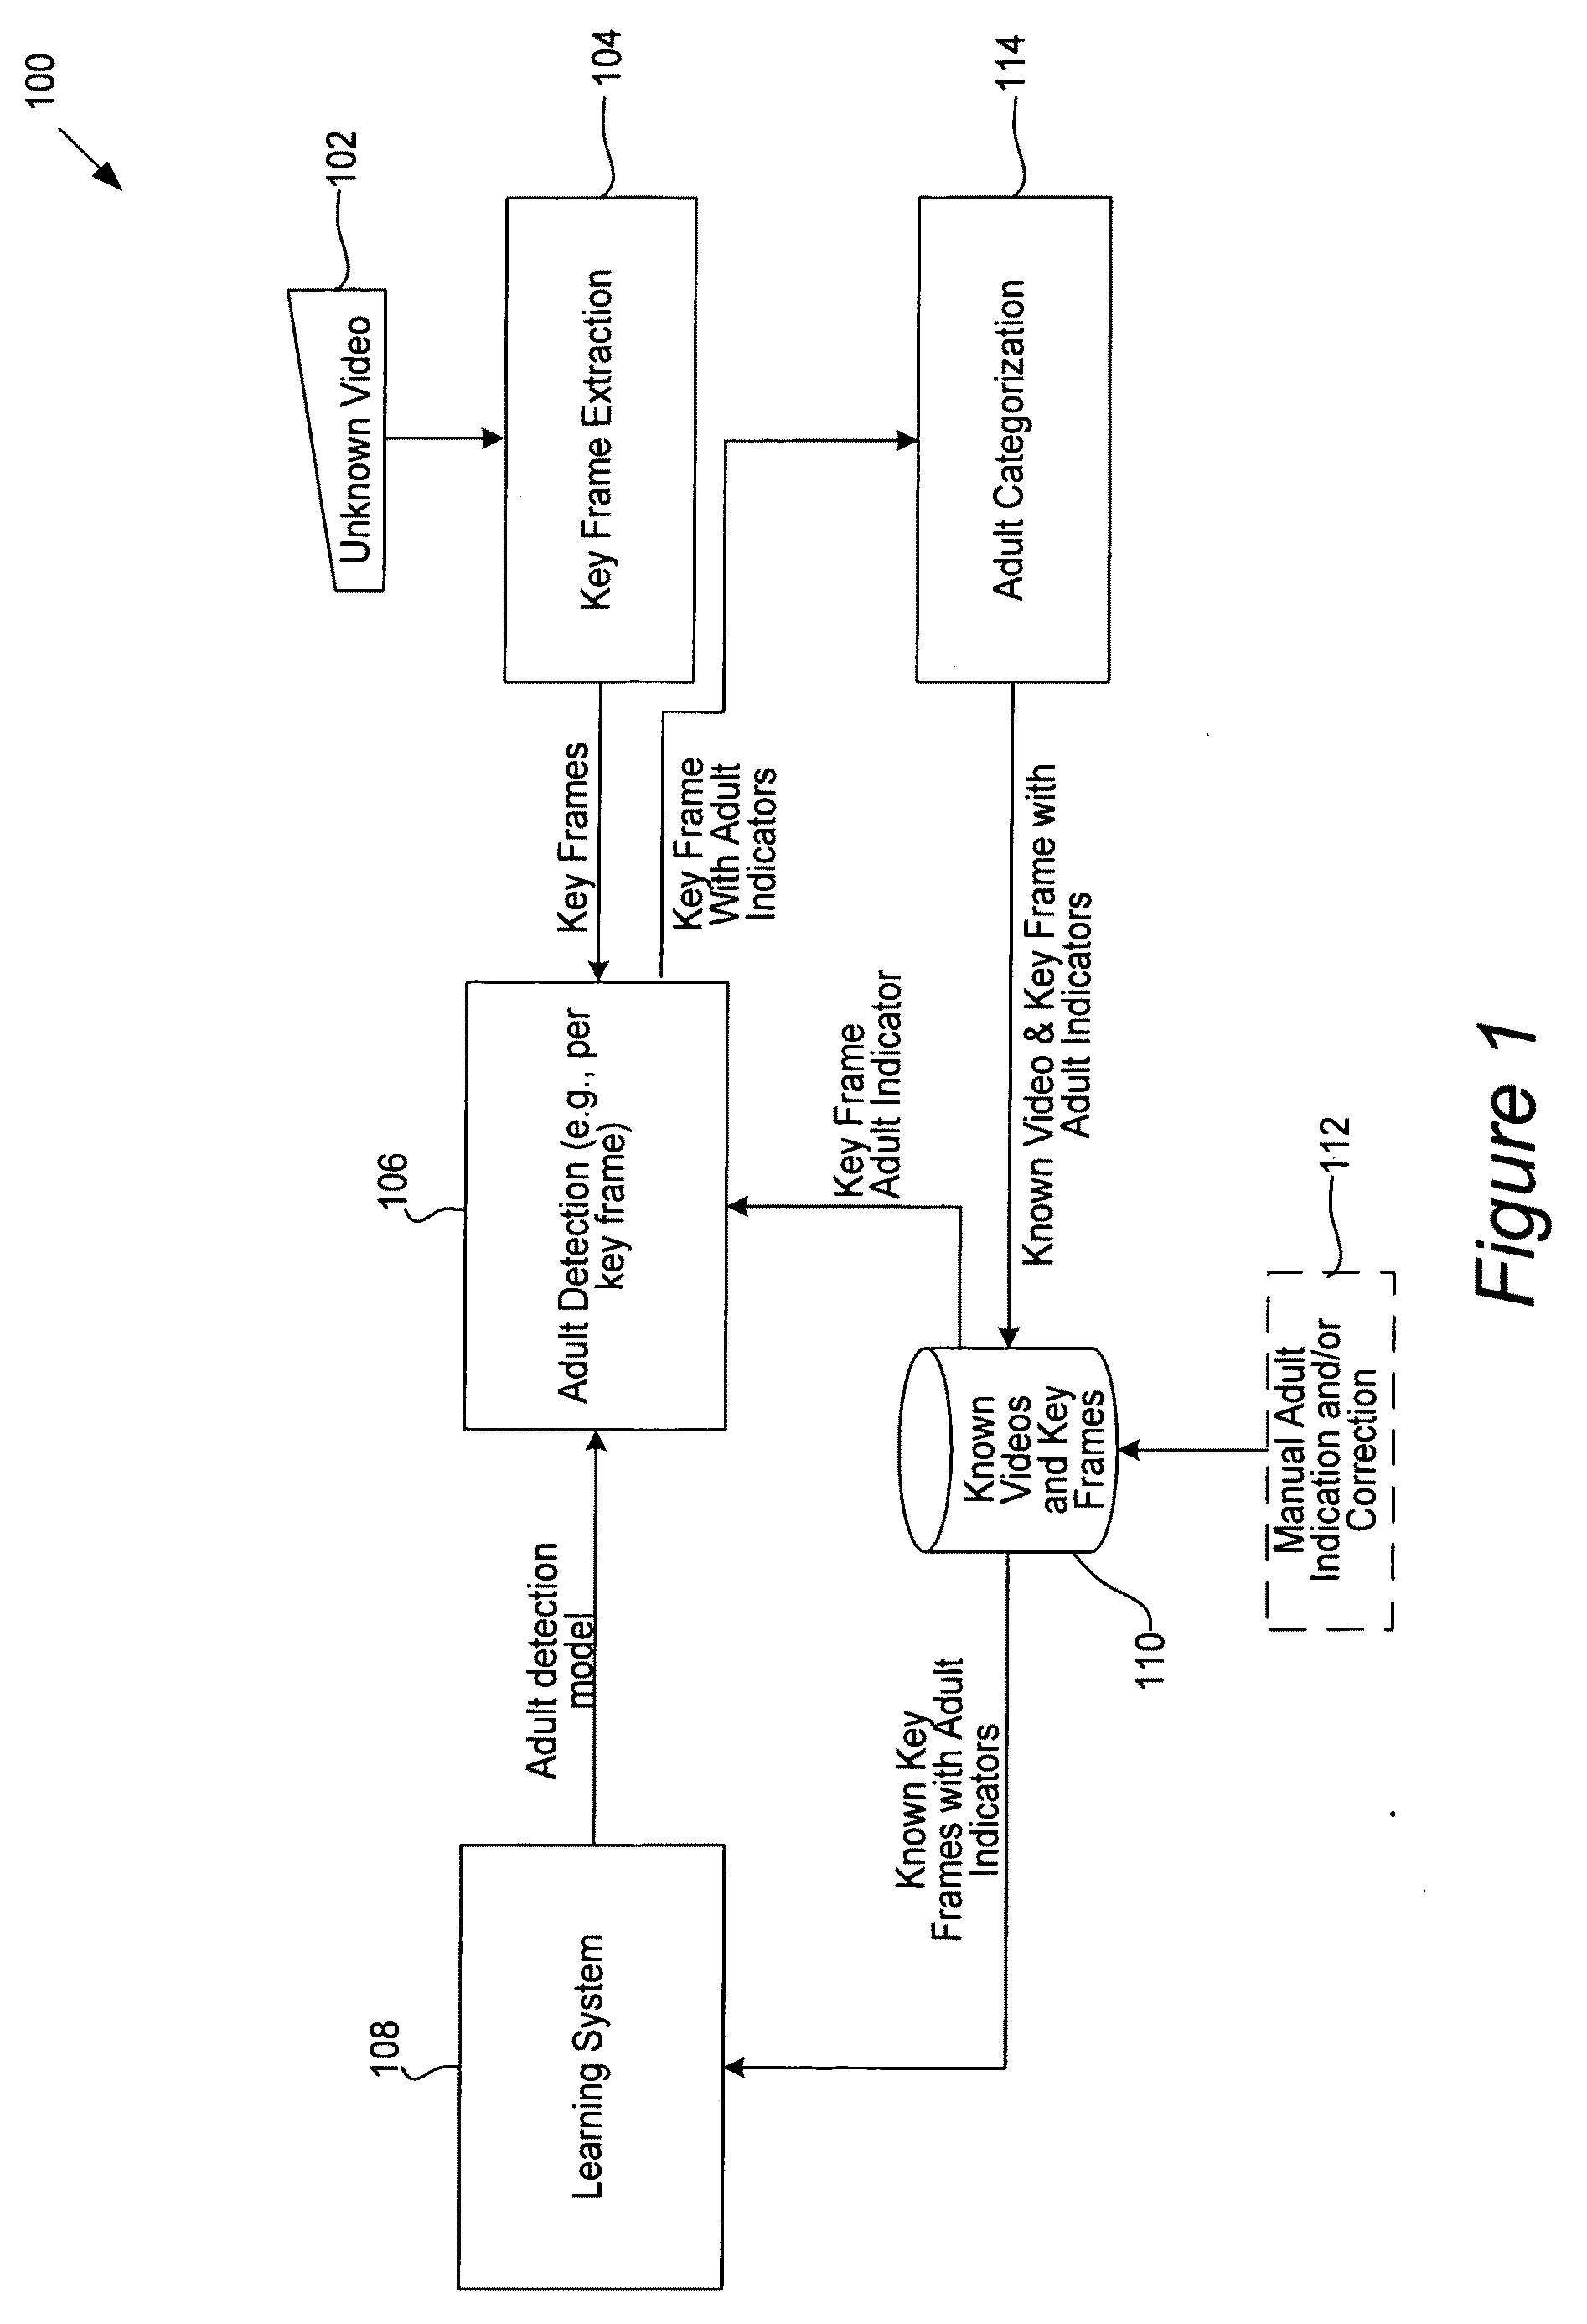 Apparatus and methods for detecting adult videos